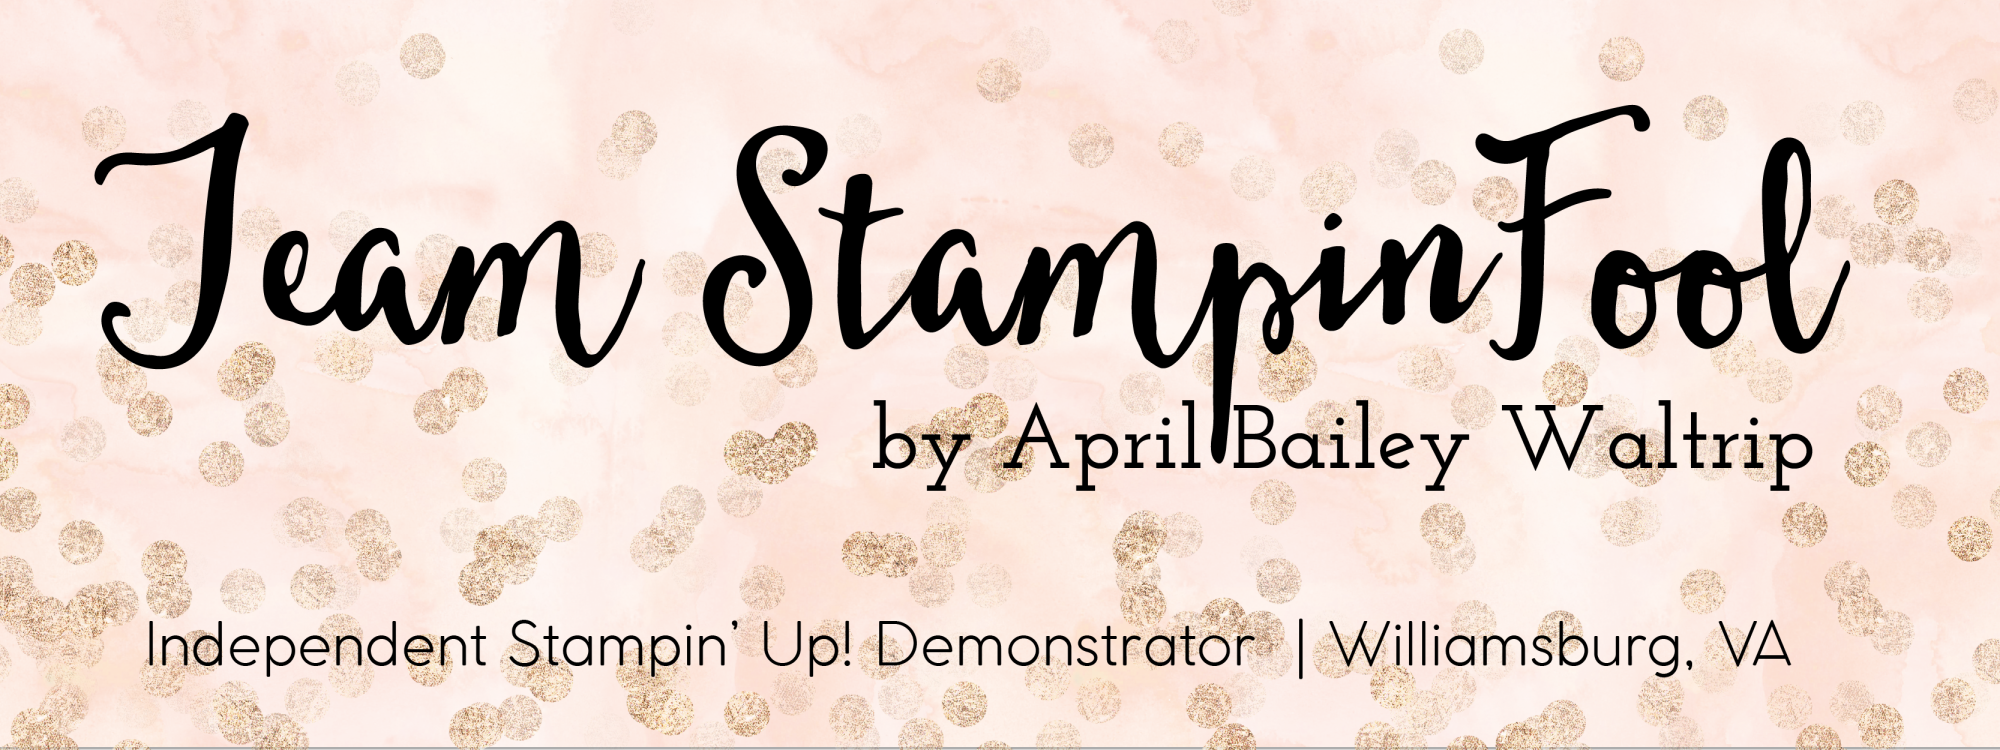 Team Stampin Fool, Stampin Up Demonstrator Training - 'swiped Right' Online Dating Valentine's Card (2000x750)